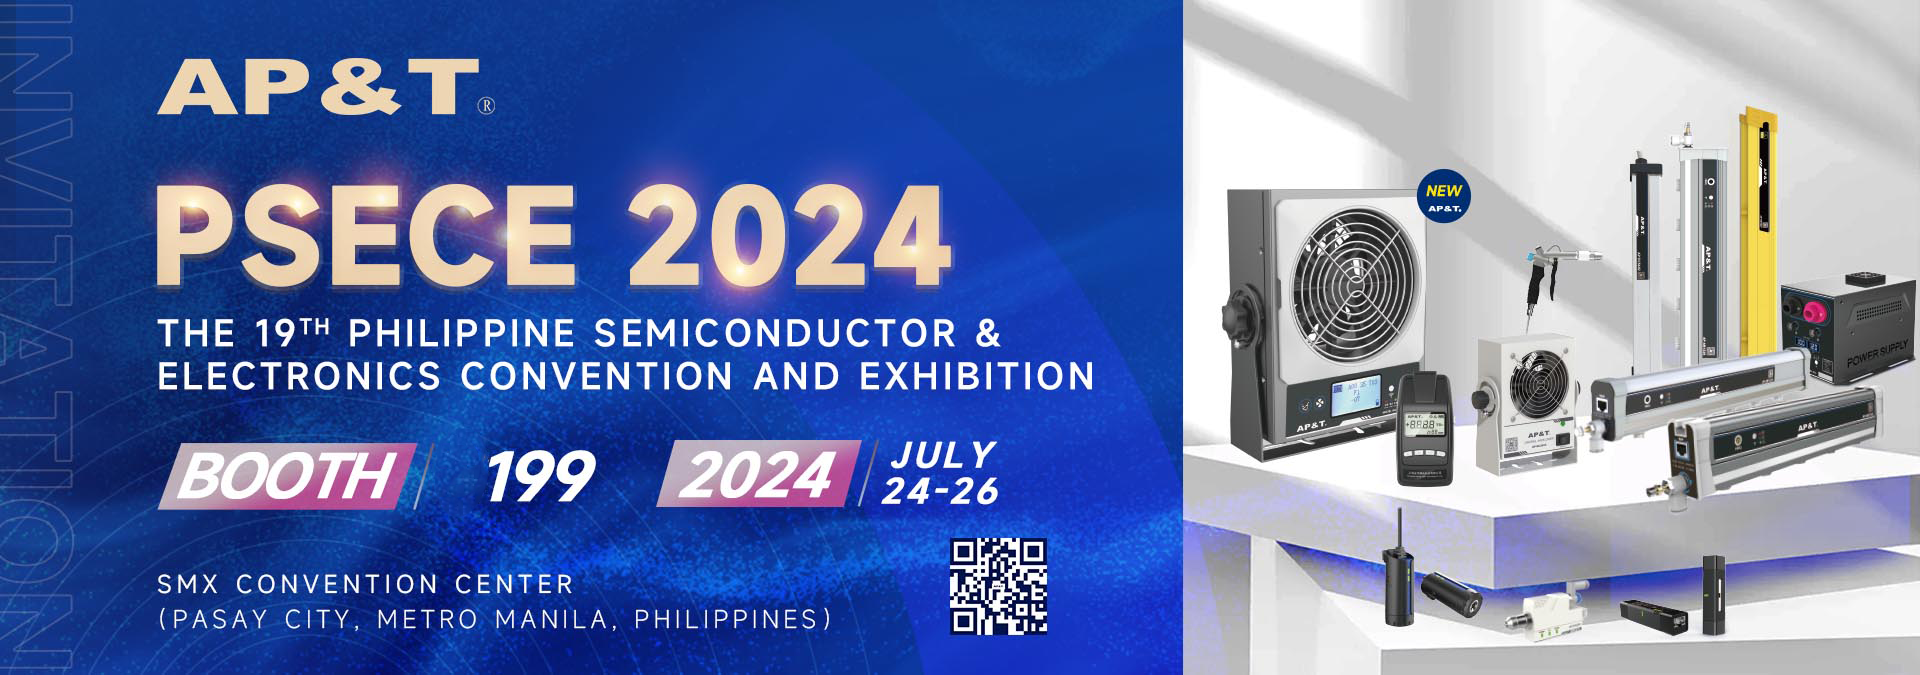 THE 19TH 2024 PHILIPPINE SEMICONDUCTOR AND ELECTRONICS CONVENTION AND EXHIBITION